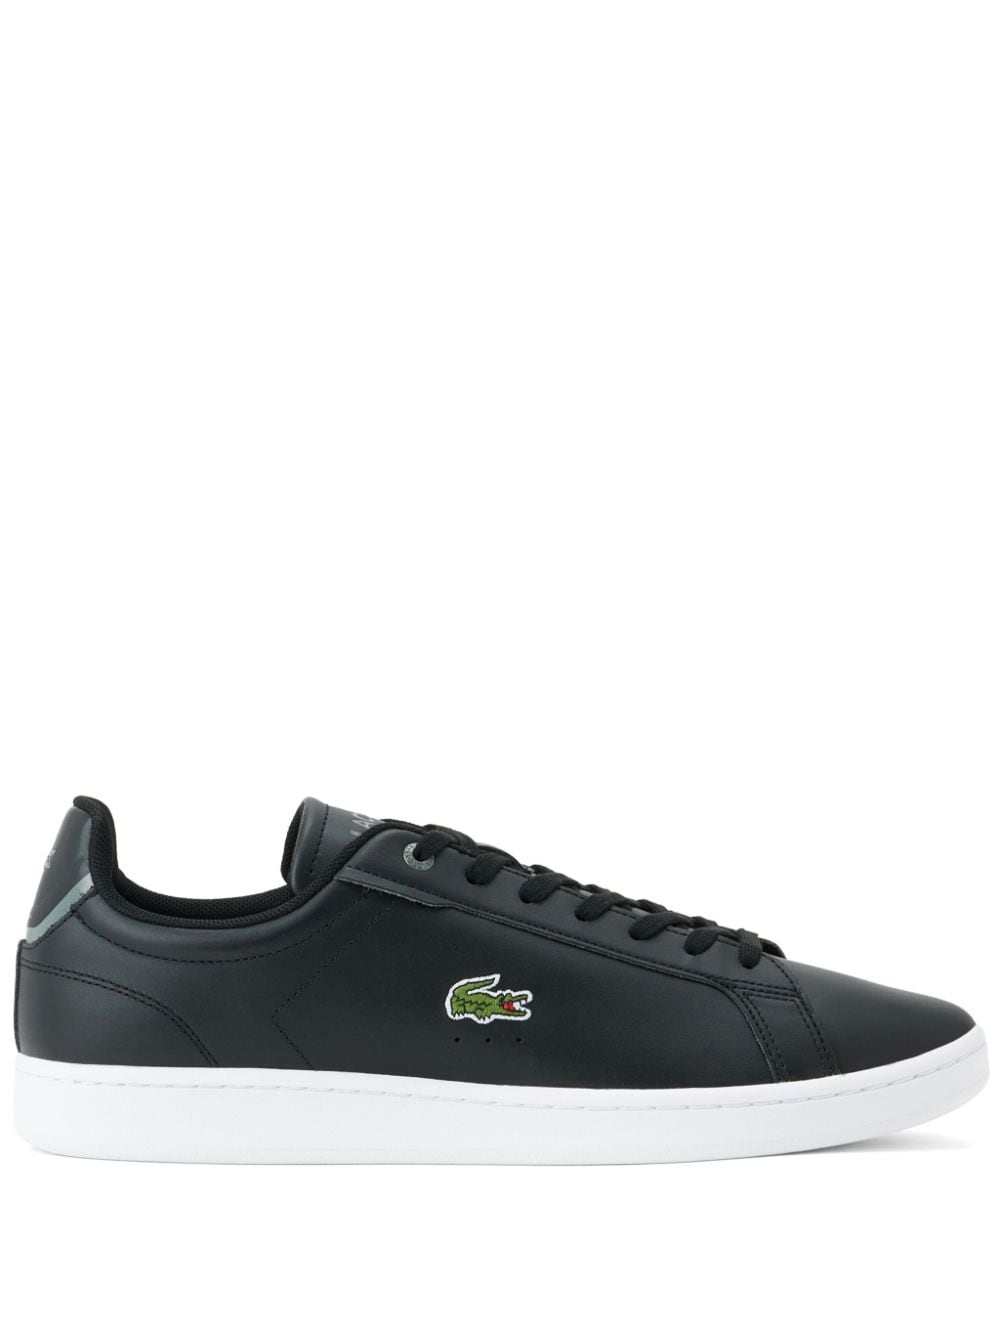 Lacoste Carnaby Pro BL leather sneakers - Black von Lacoste